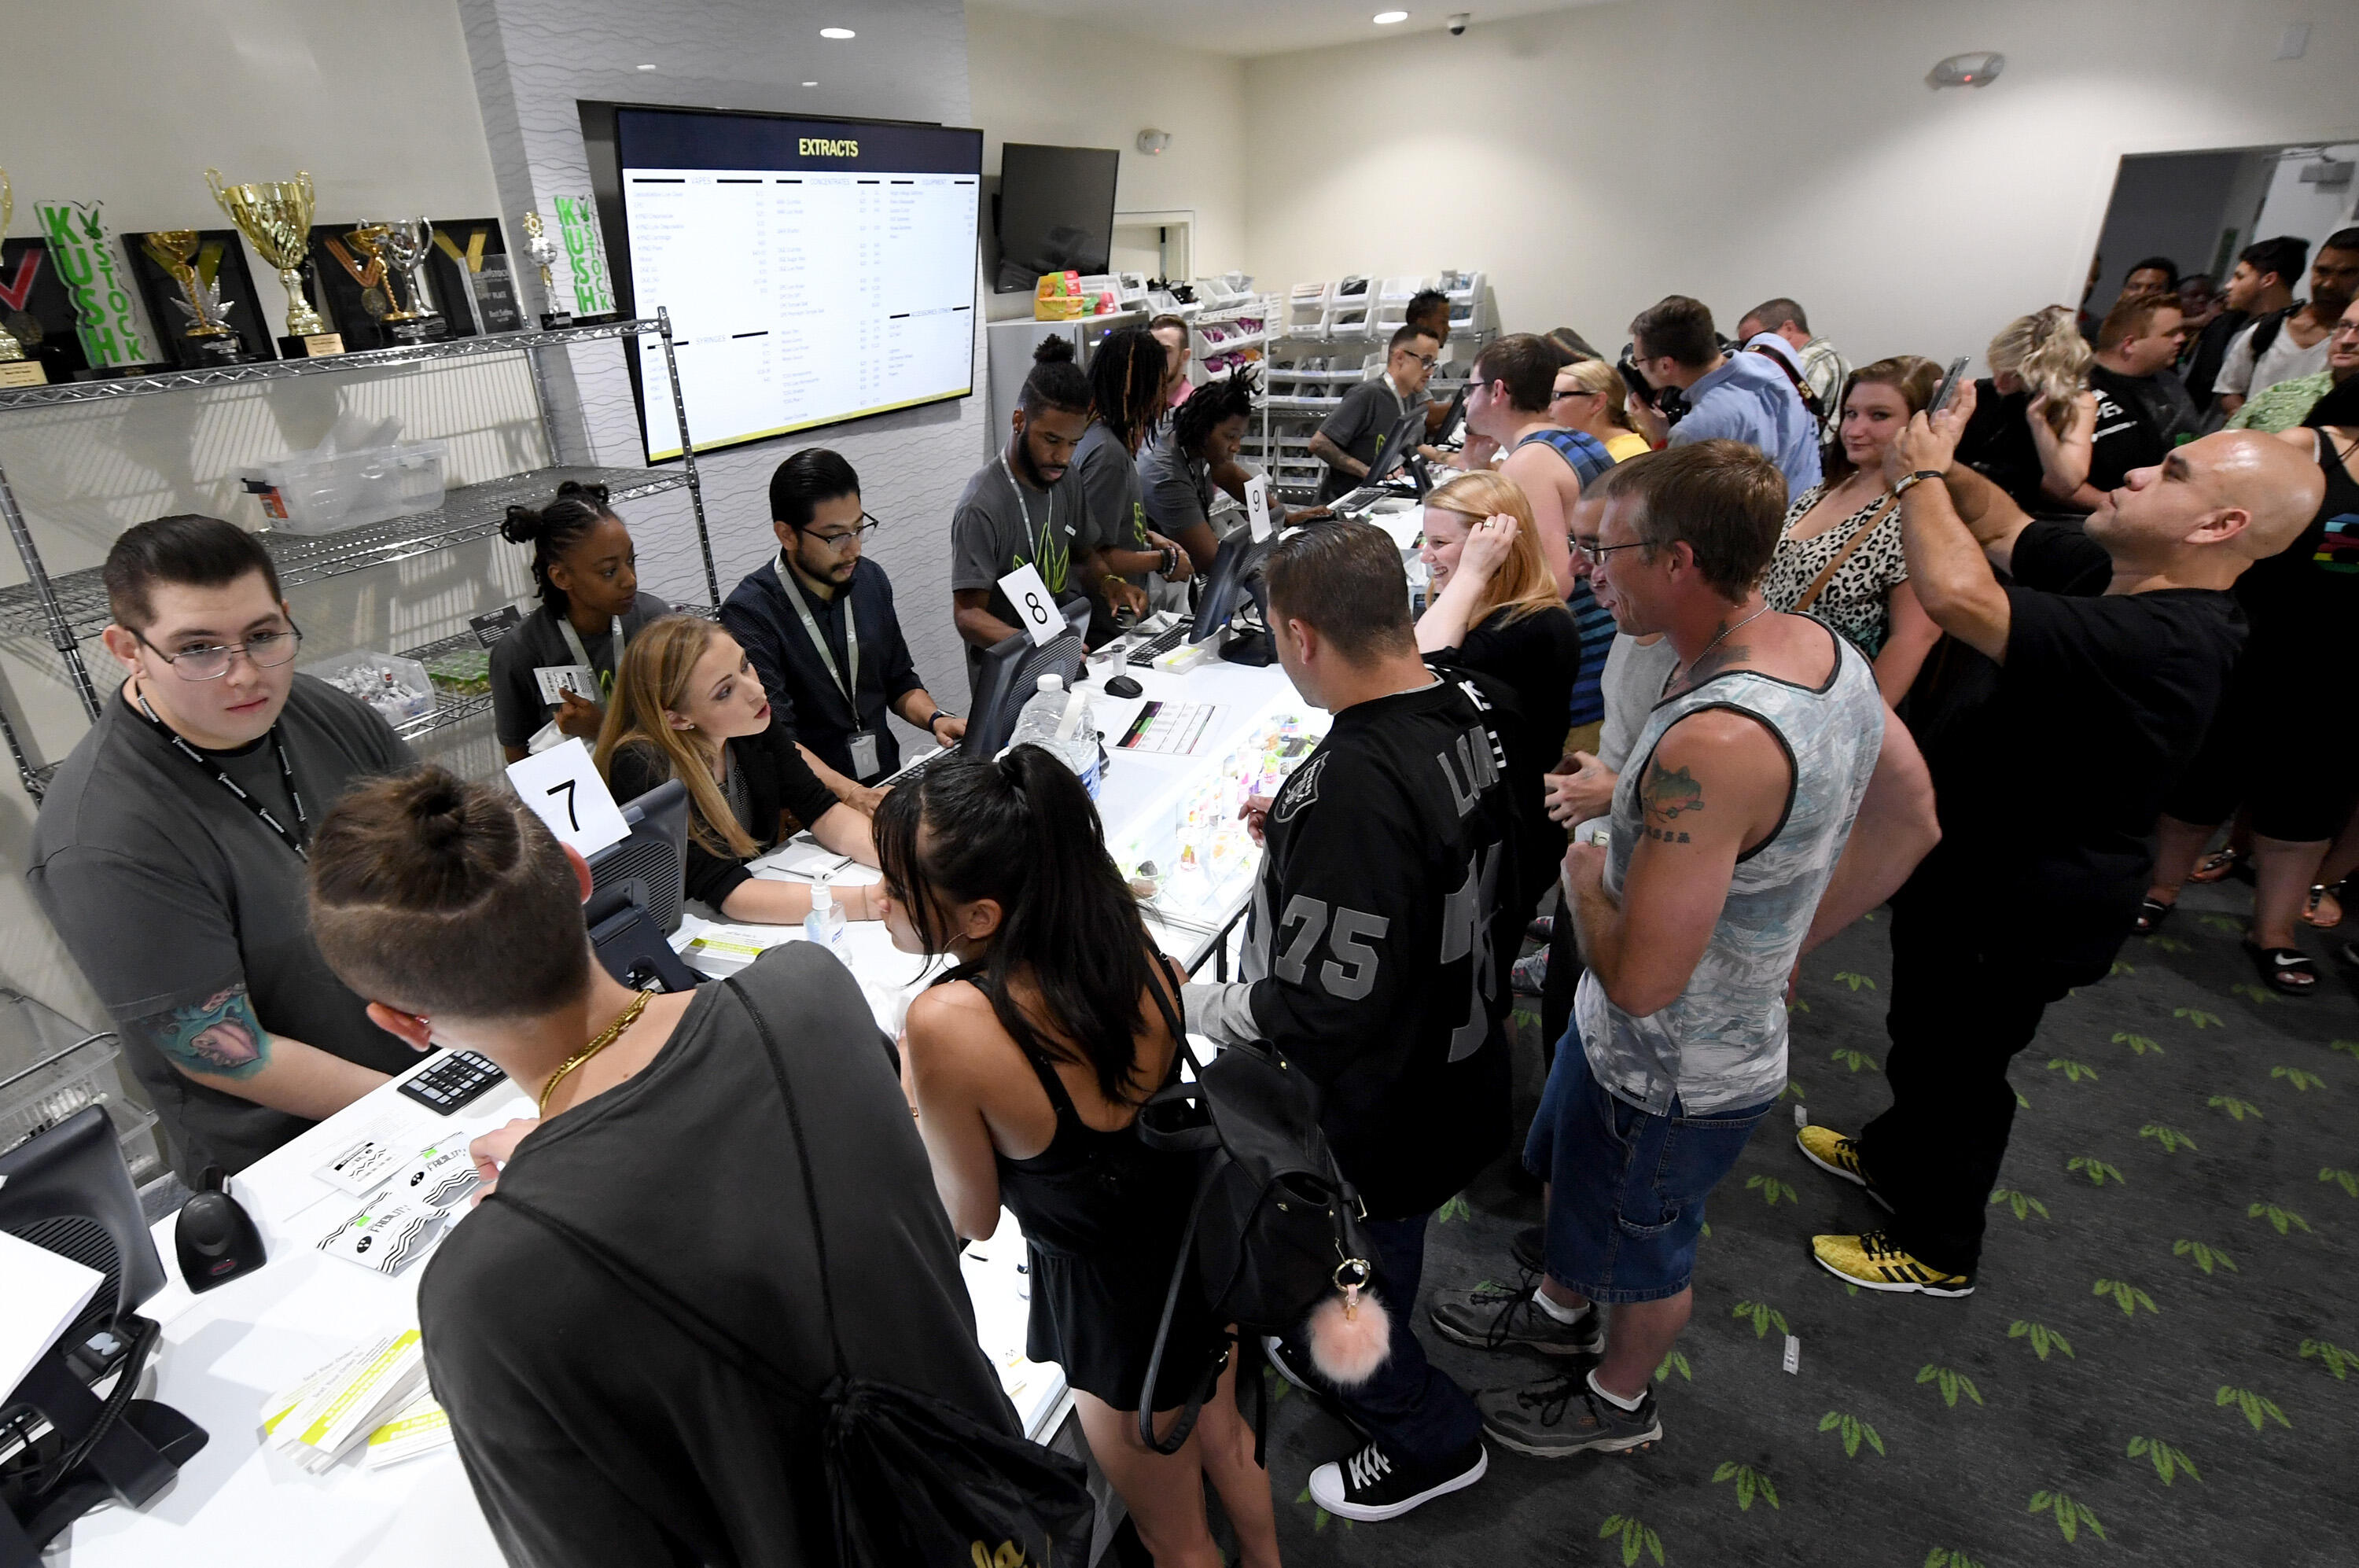 LAS VEGAS, NV - JULY 01:  Customers buy cannabis products at Essence Vegas Cannabis Dispensary after the start of recreational marijuana sales began on July 1, 2017 in Las Vegas, Nevada. Nevada joins seven other states allowing recreational marijuana use 